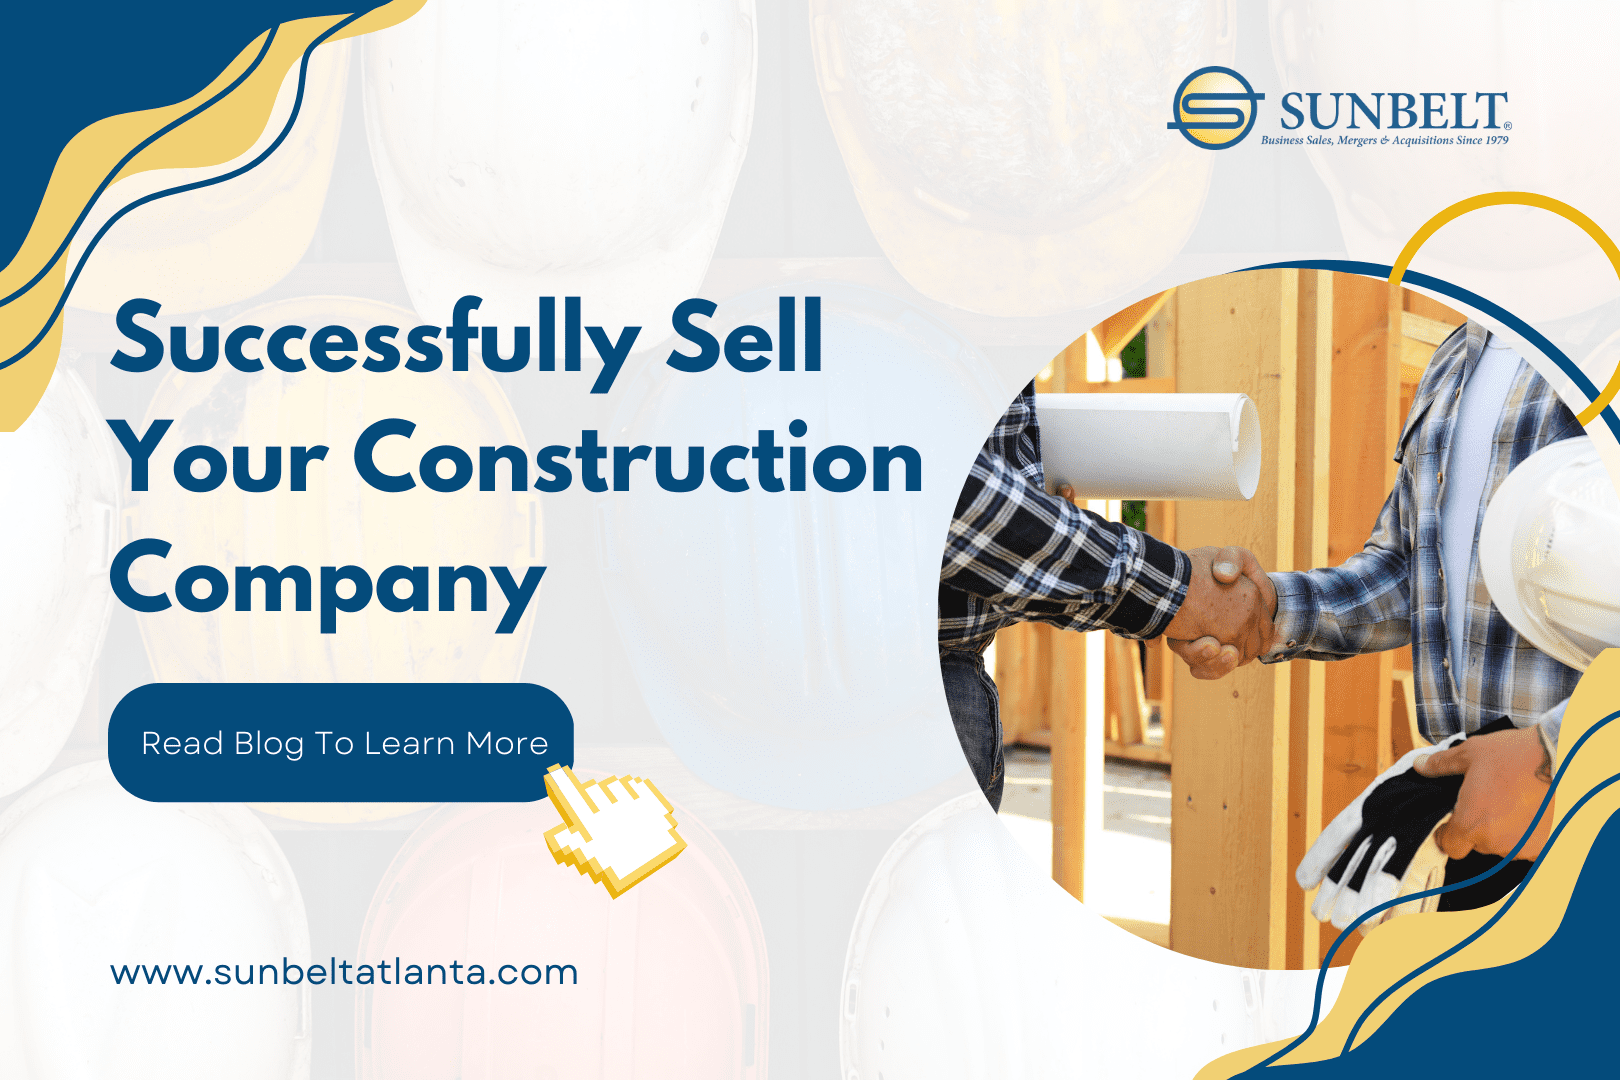 Selling a Construction Company? Here's How to Prepare a Successful Sale